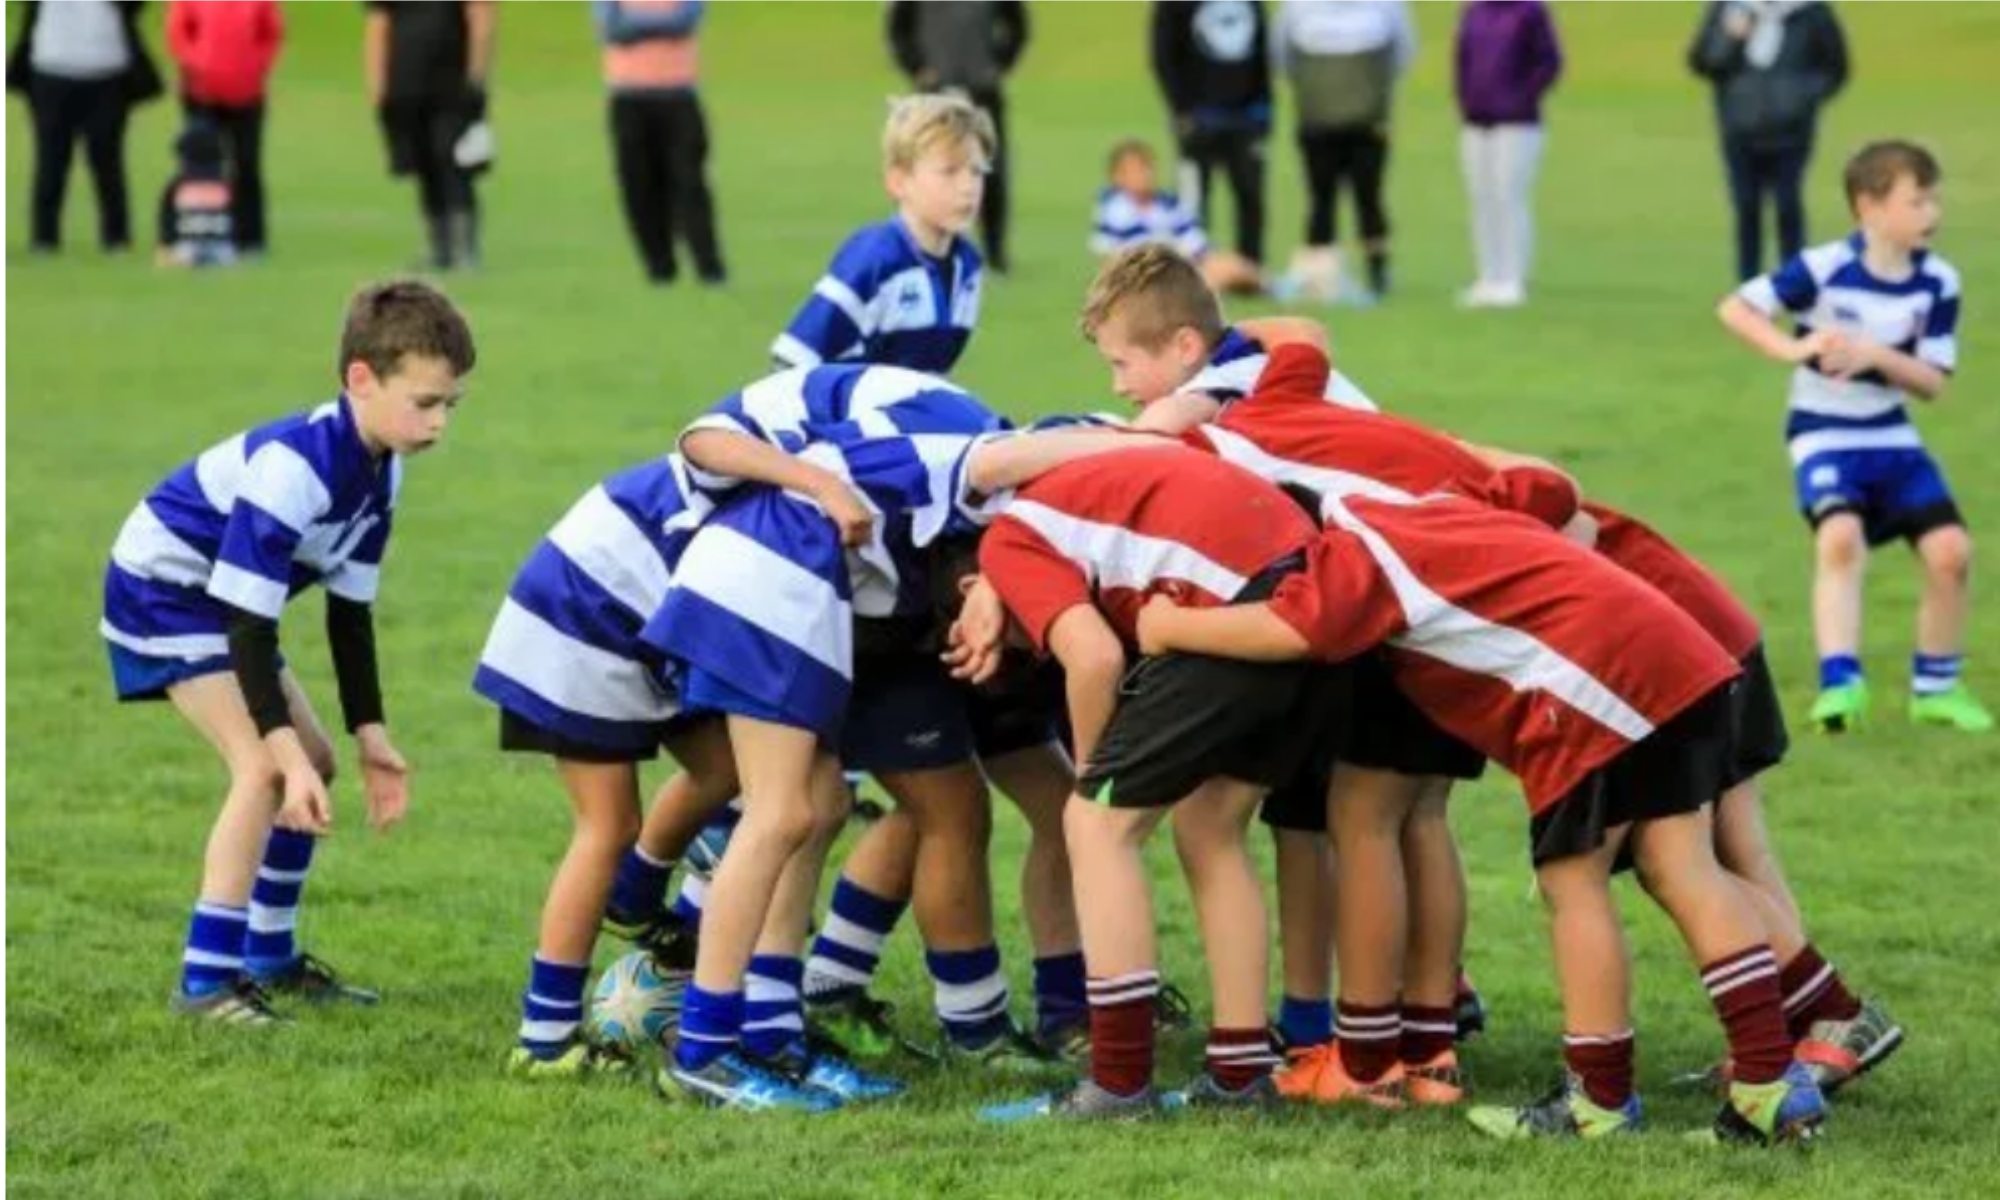 2018 JAB Junior Rugby Review – Have your say